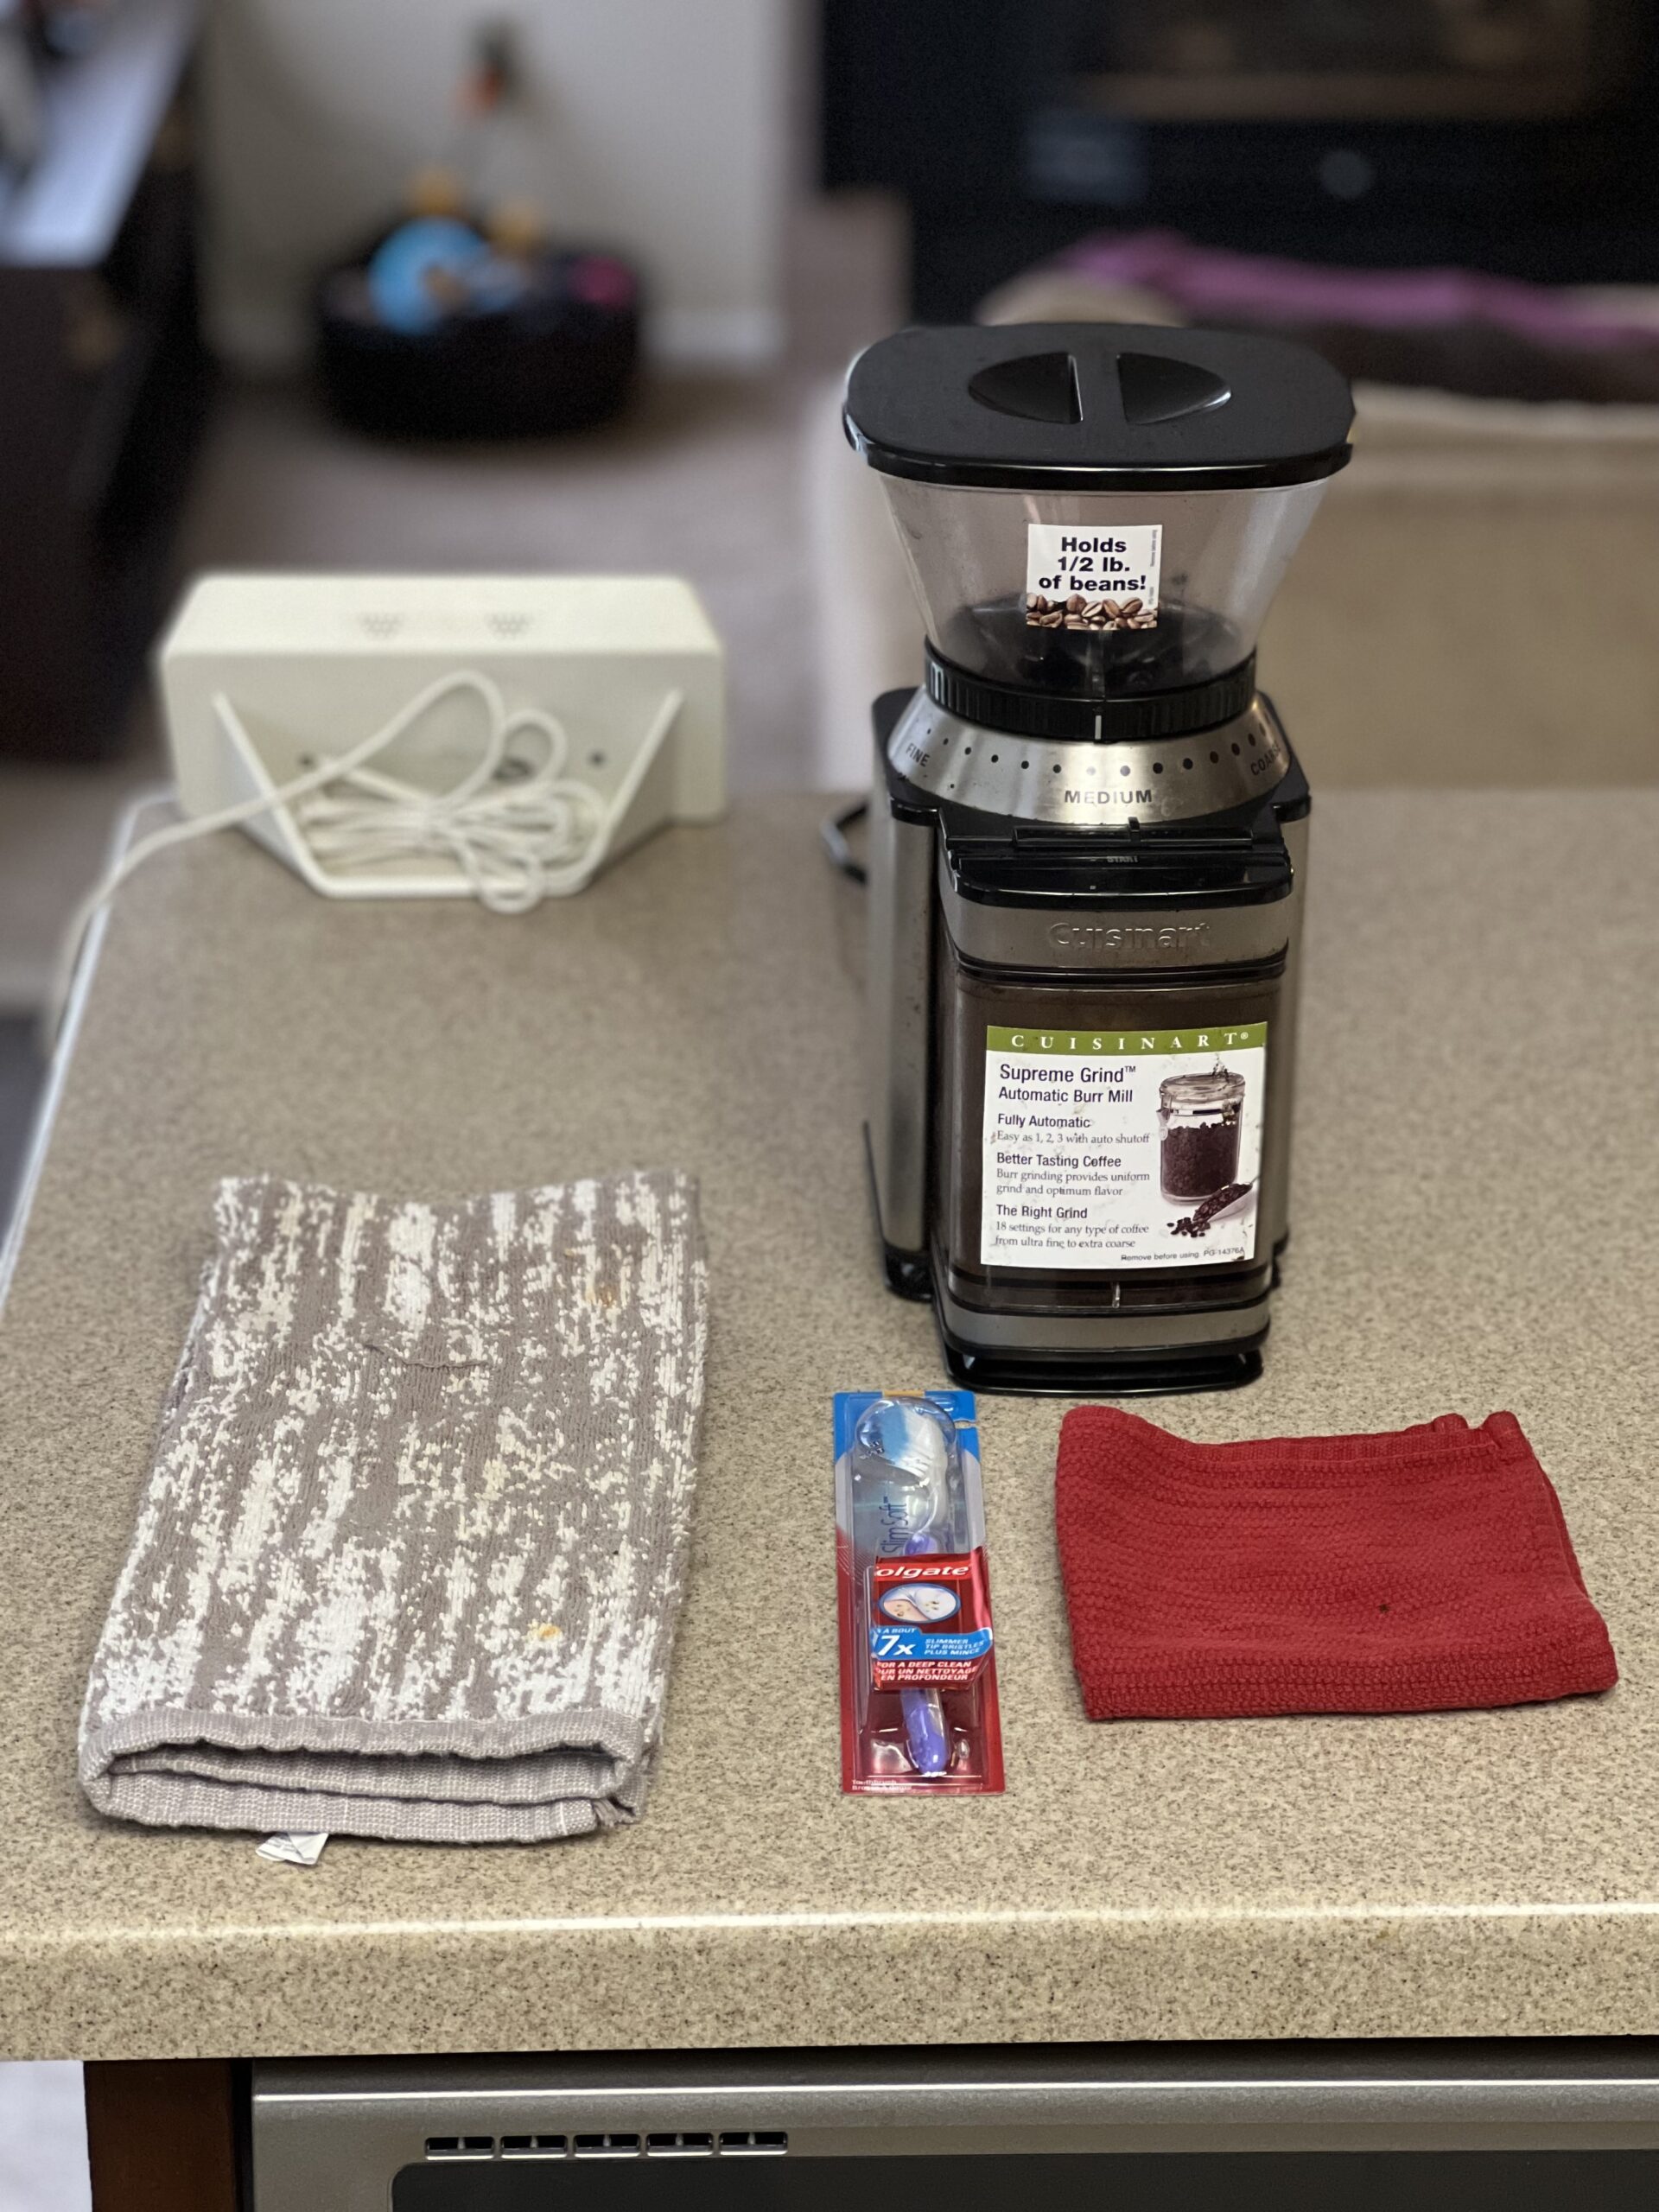 Cuisinart DBM-8 Coffee Grinder, two towels, and toothbrush on the table